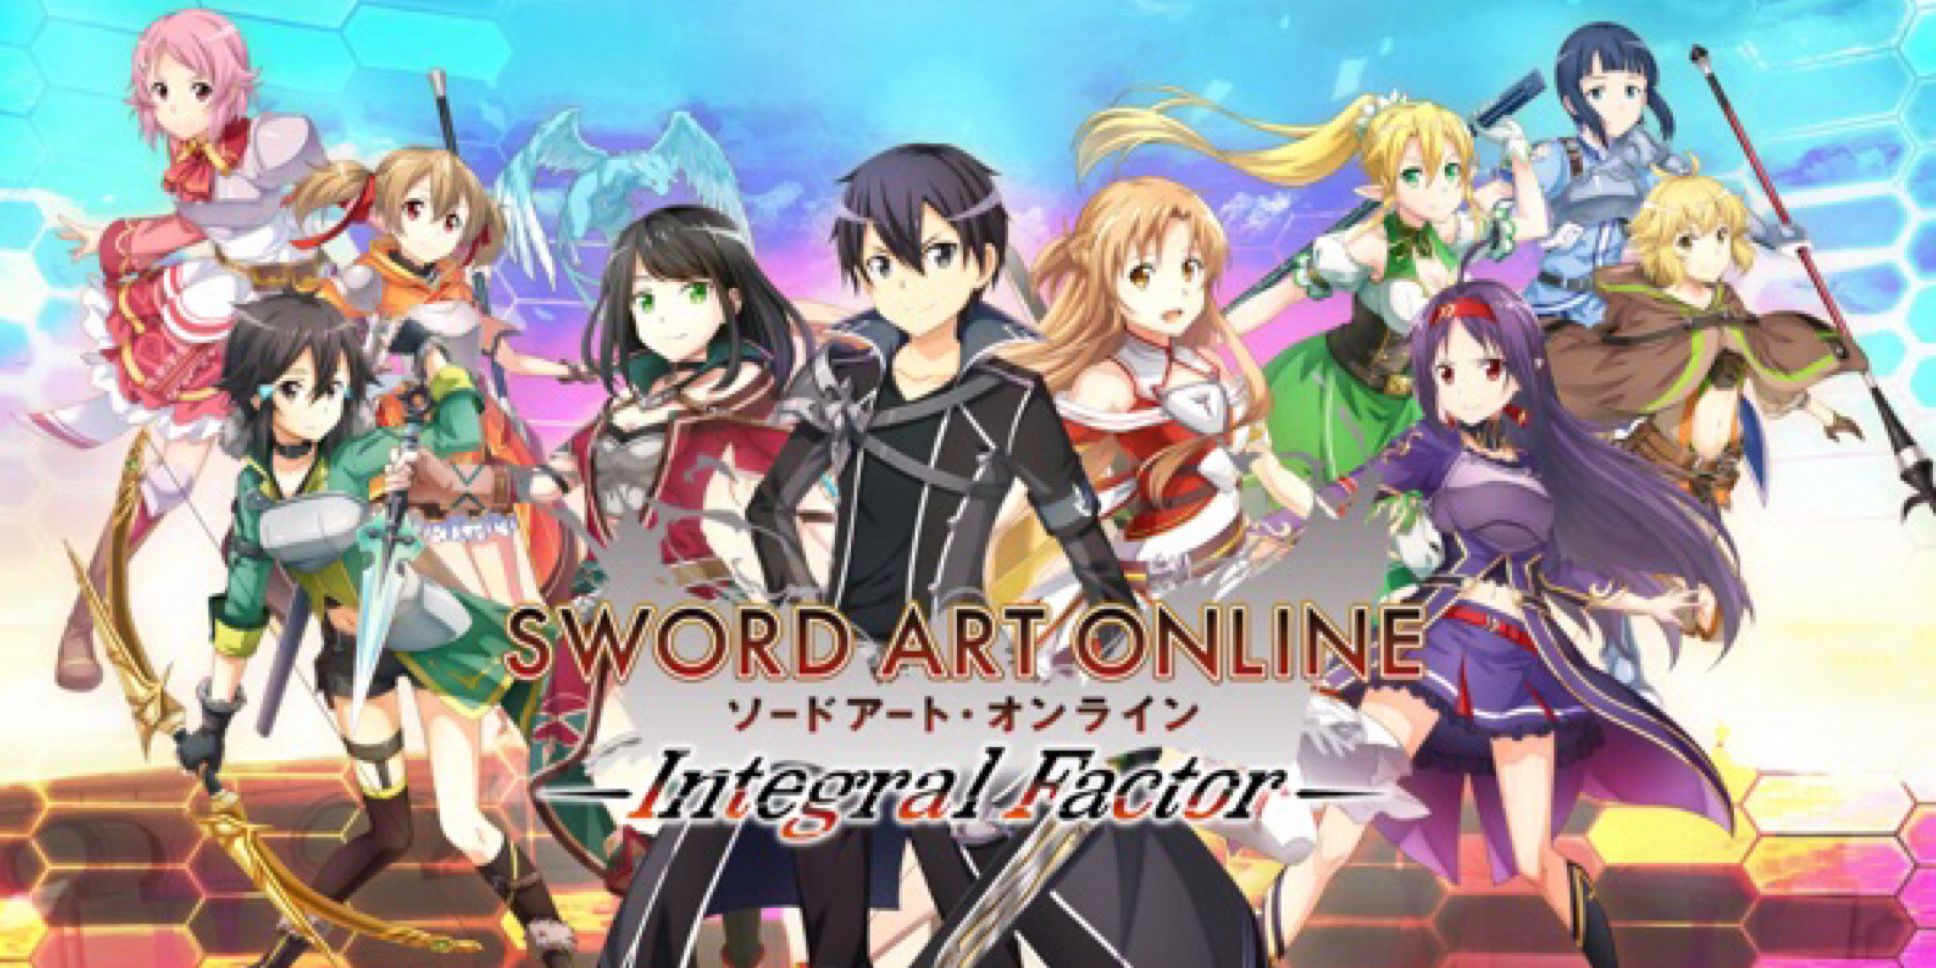 A screenshot from the Sword Art Online Integral Factor mobile game.